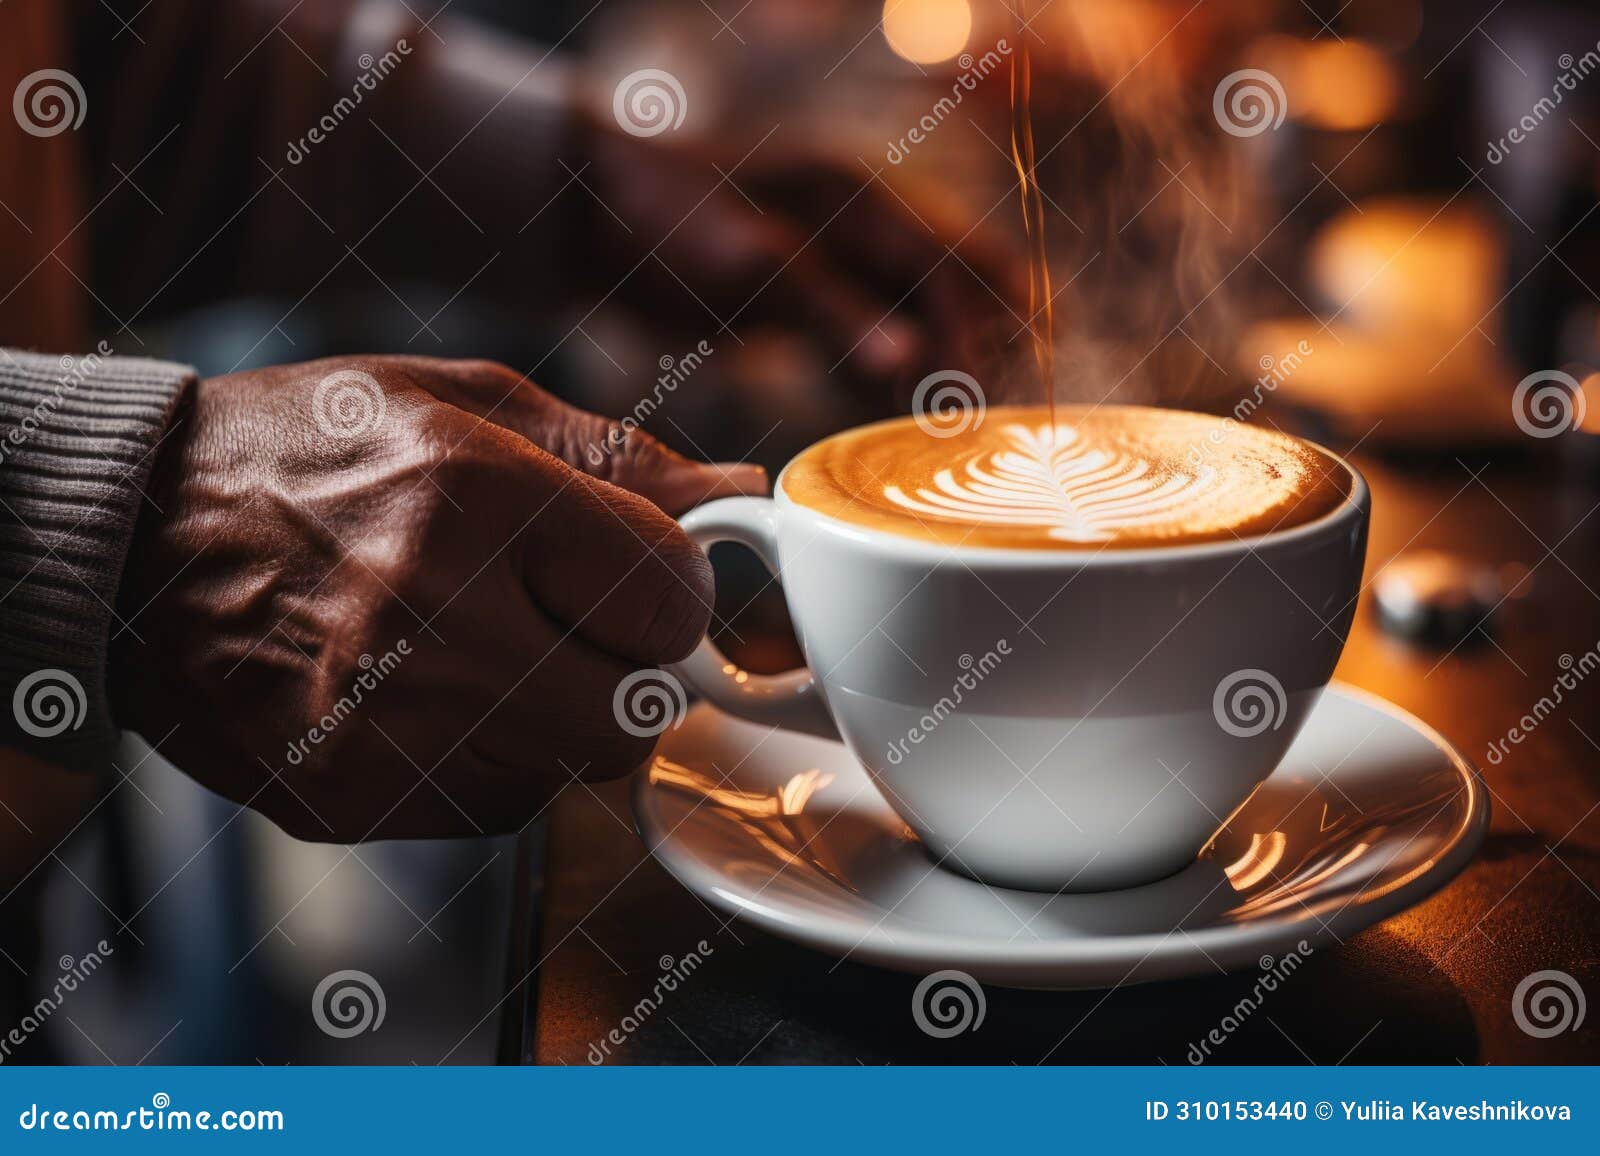 man hand hold cup hot coffee beans cozy cafe evening relaxation calm tasty drink cocoa latte cappuccino americano